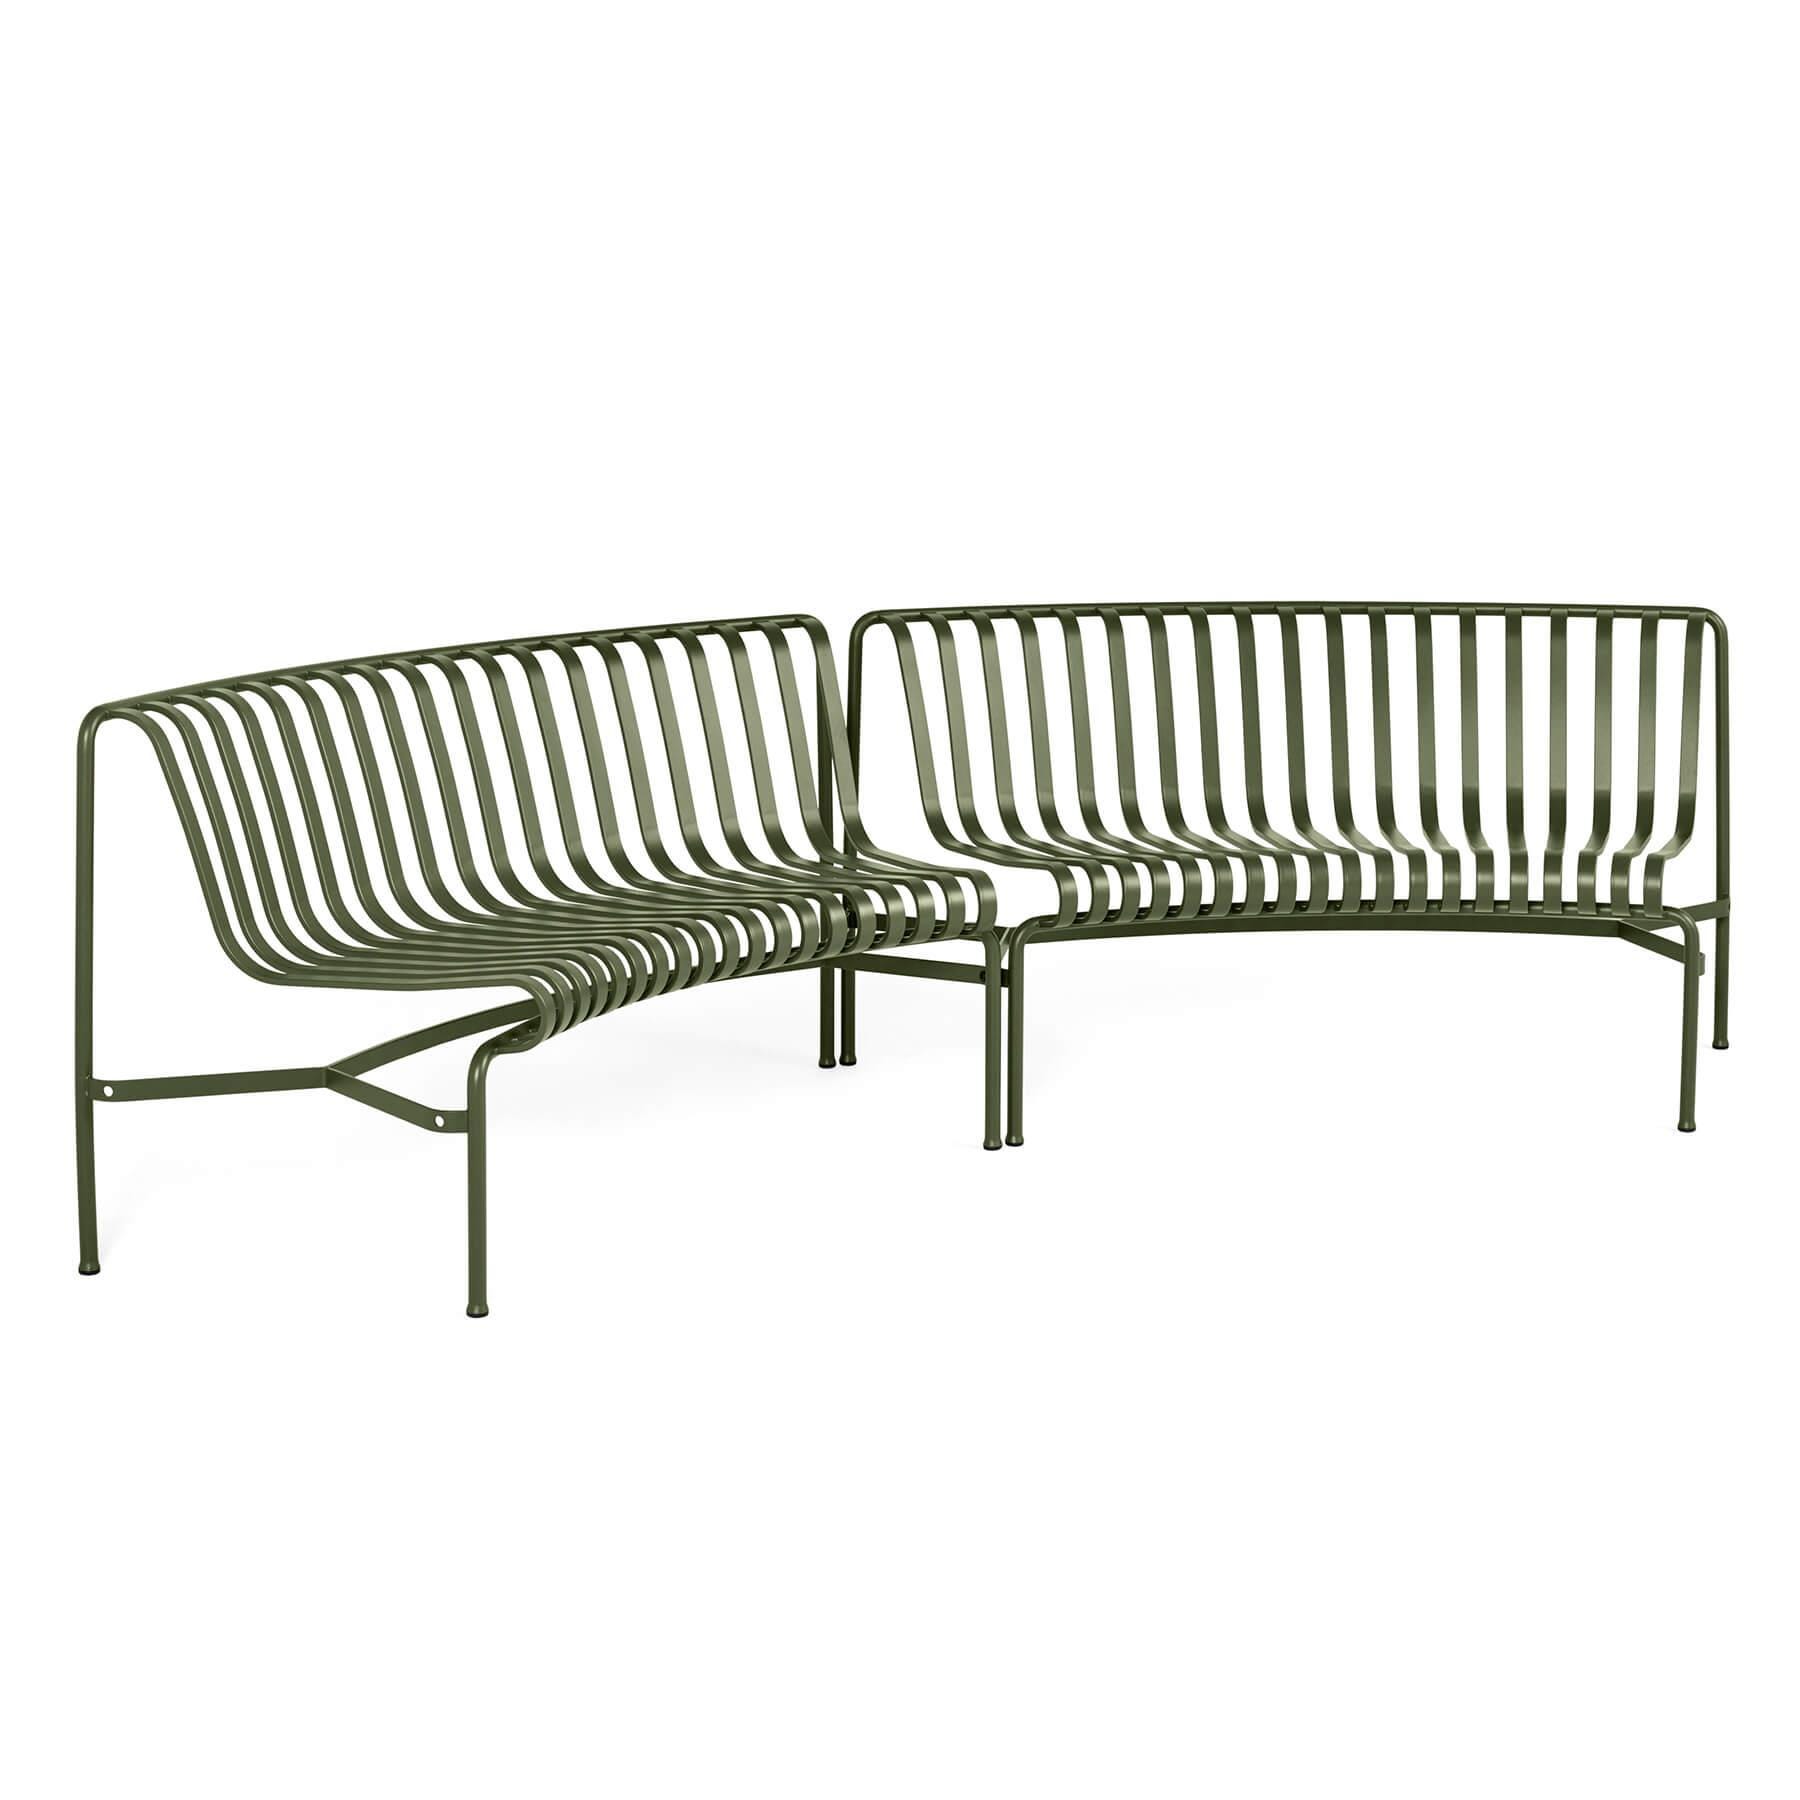 Hay Palissade Park Dining Bench In In Olive Green Designer Furniture From Holloways Of Ludlow